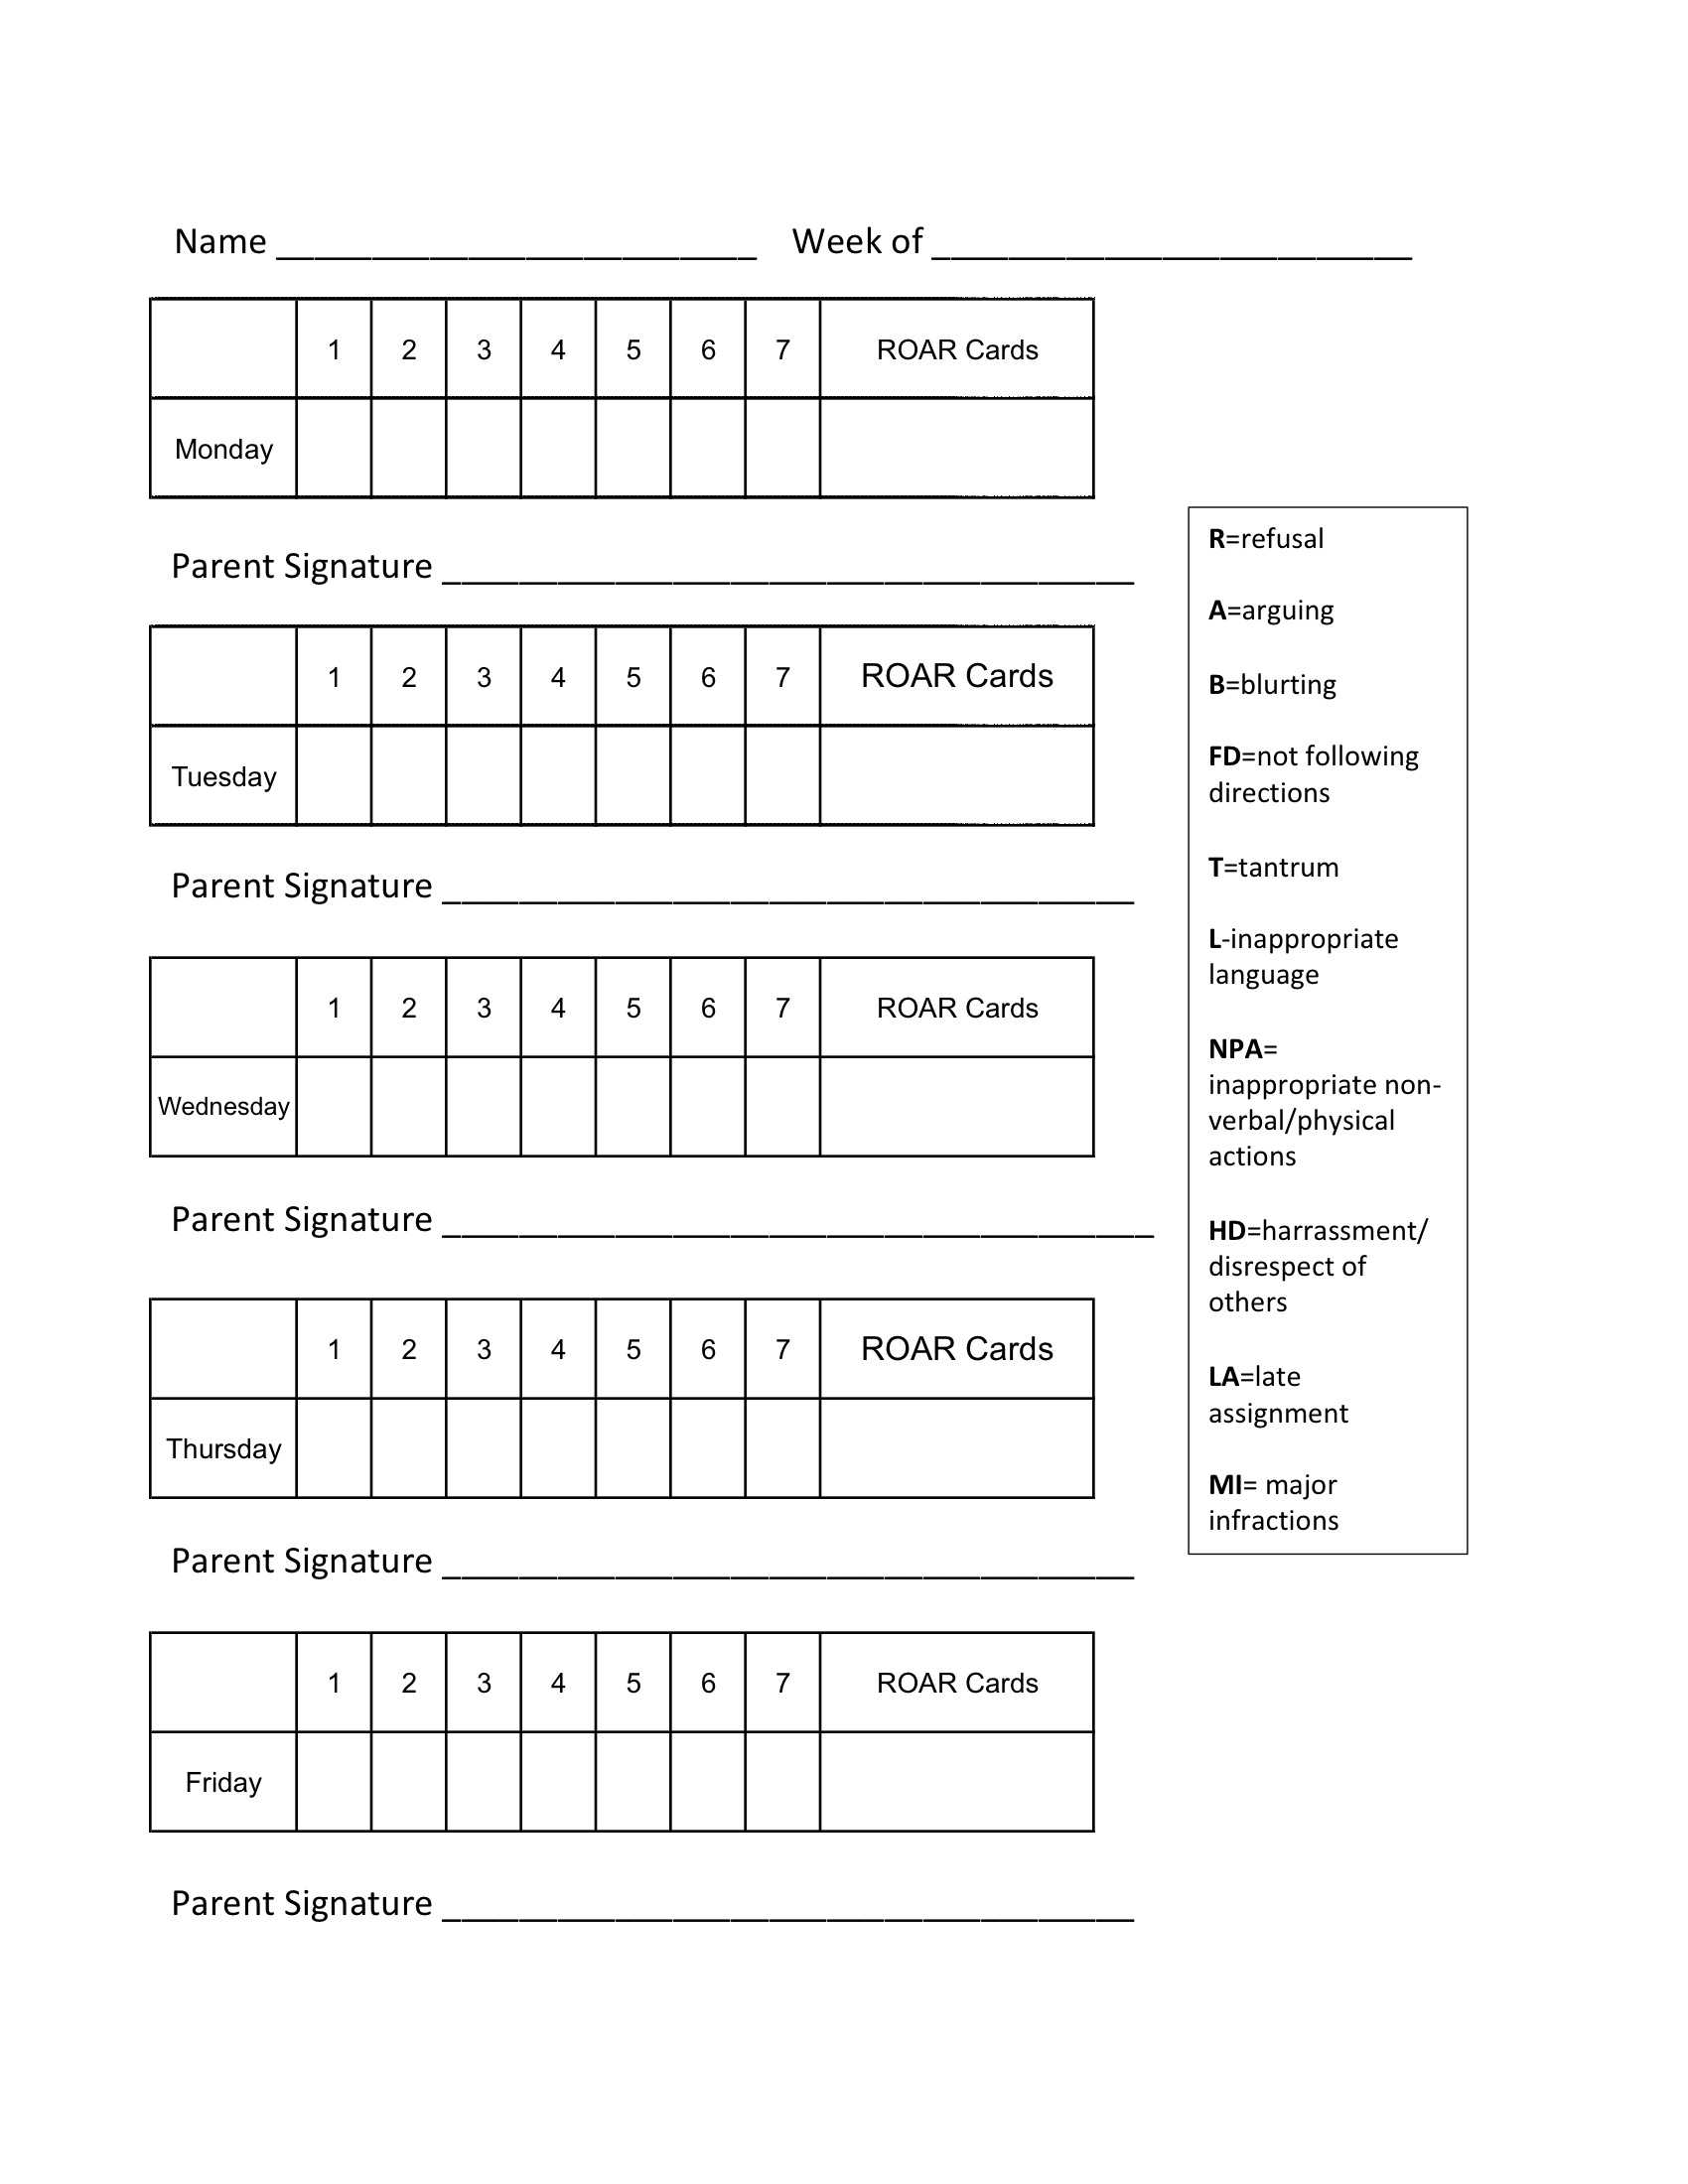 Daily Behavior Chart For Middle School Students – Cuna Throughout Daily Behavior Report Template